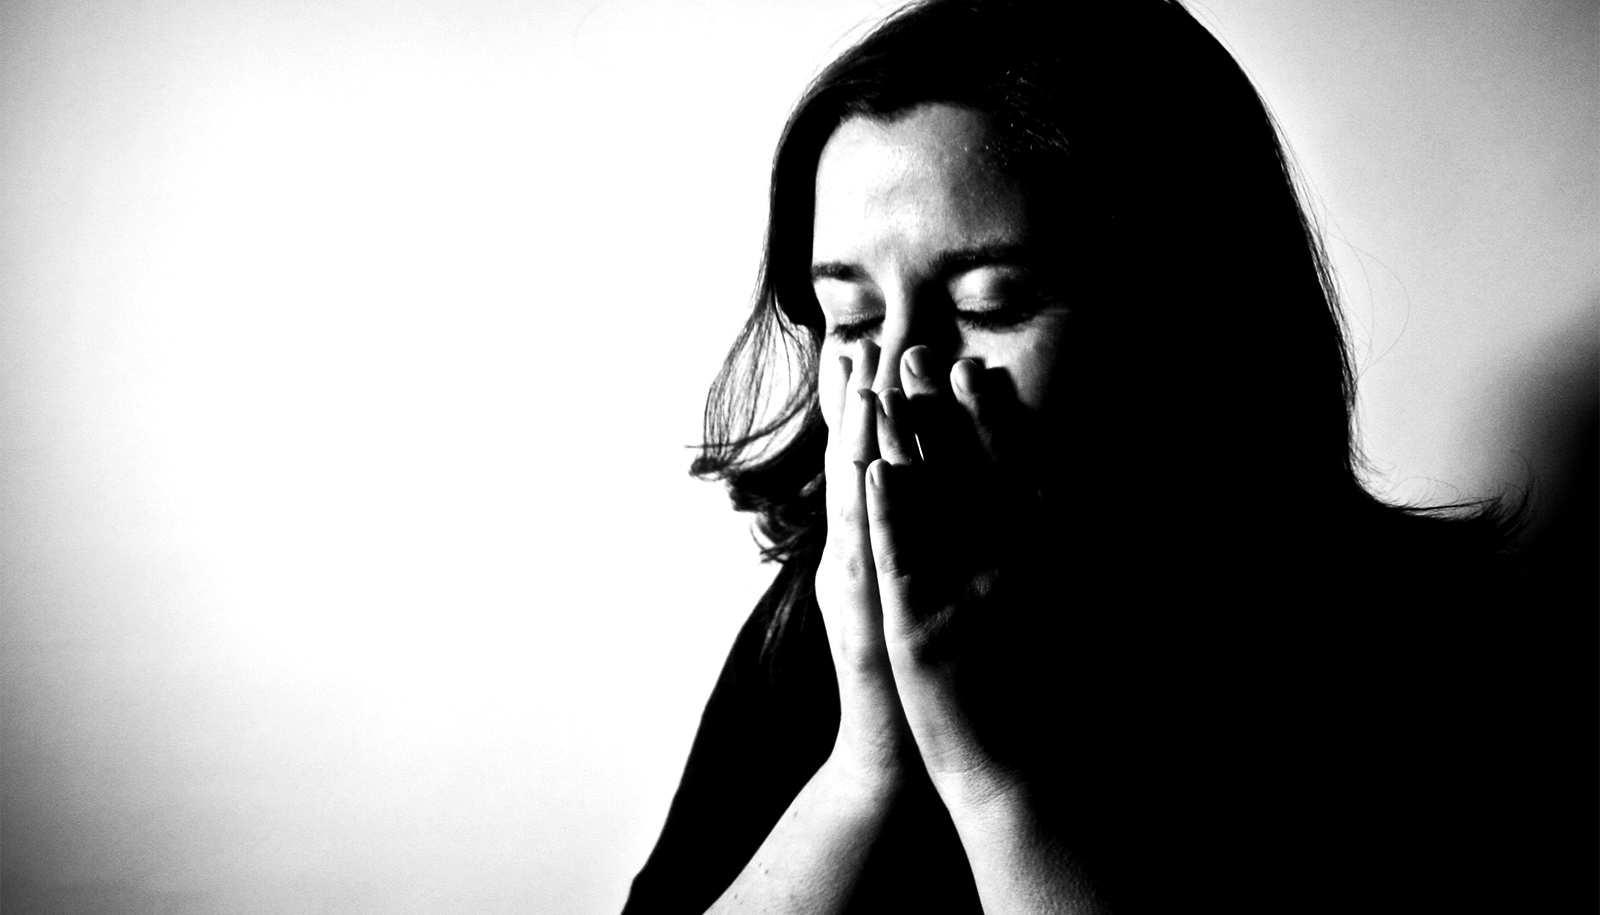 A black and white image of a hispanic woman with her face between her hands